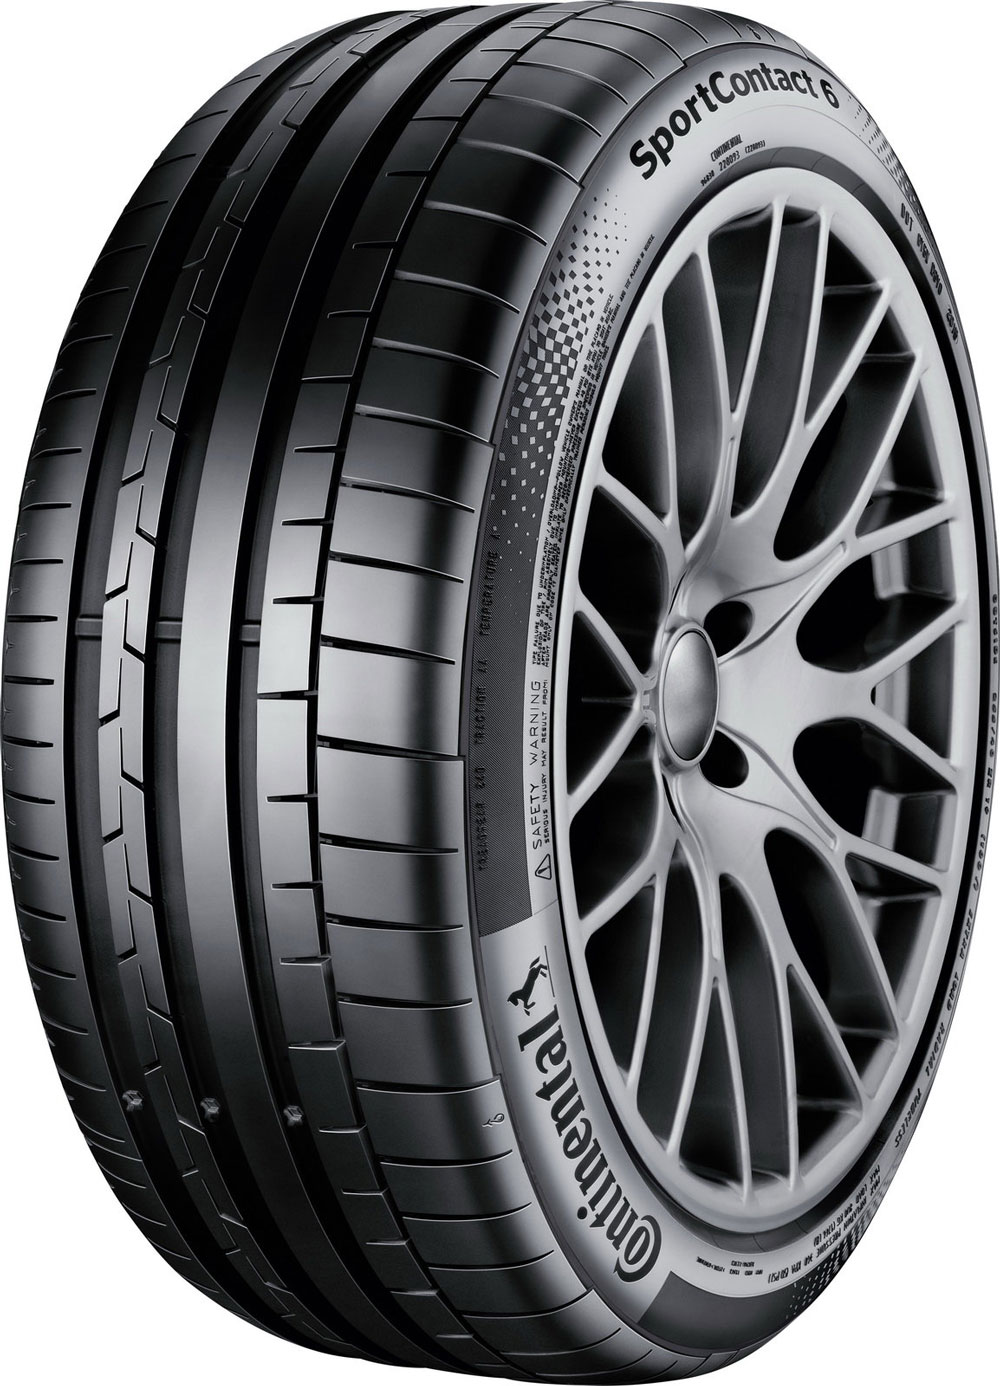 CONTINENTAL SPORT CONTACT 6 XL FP 325/25 R20 101Y